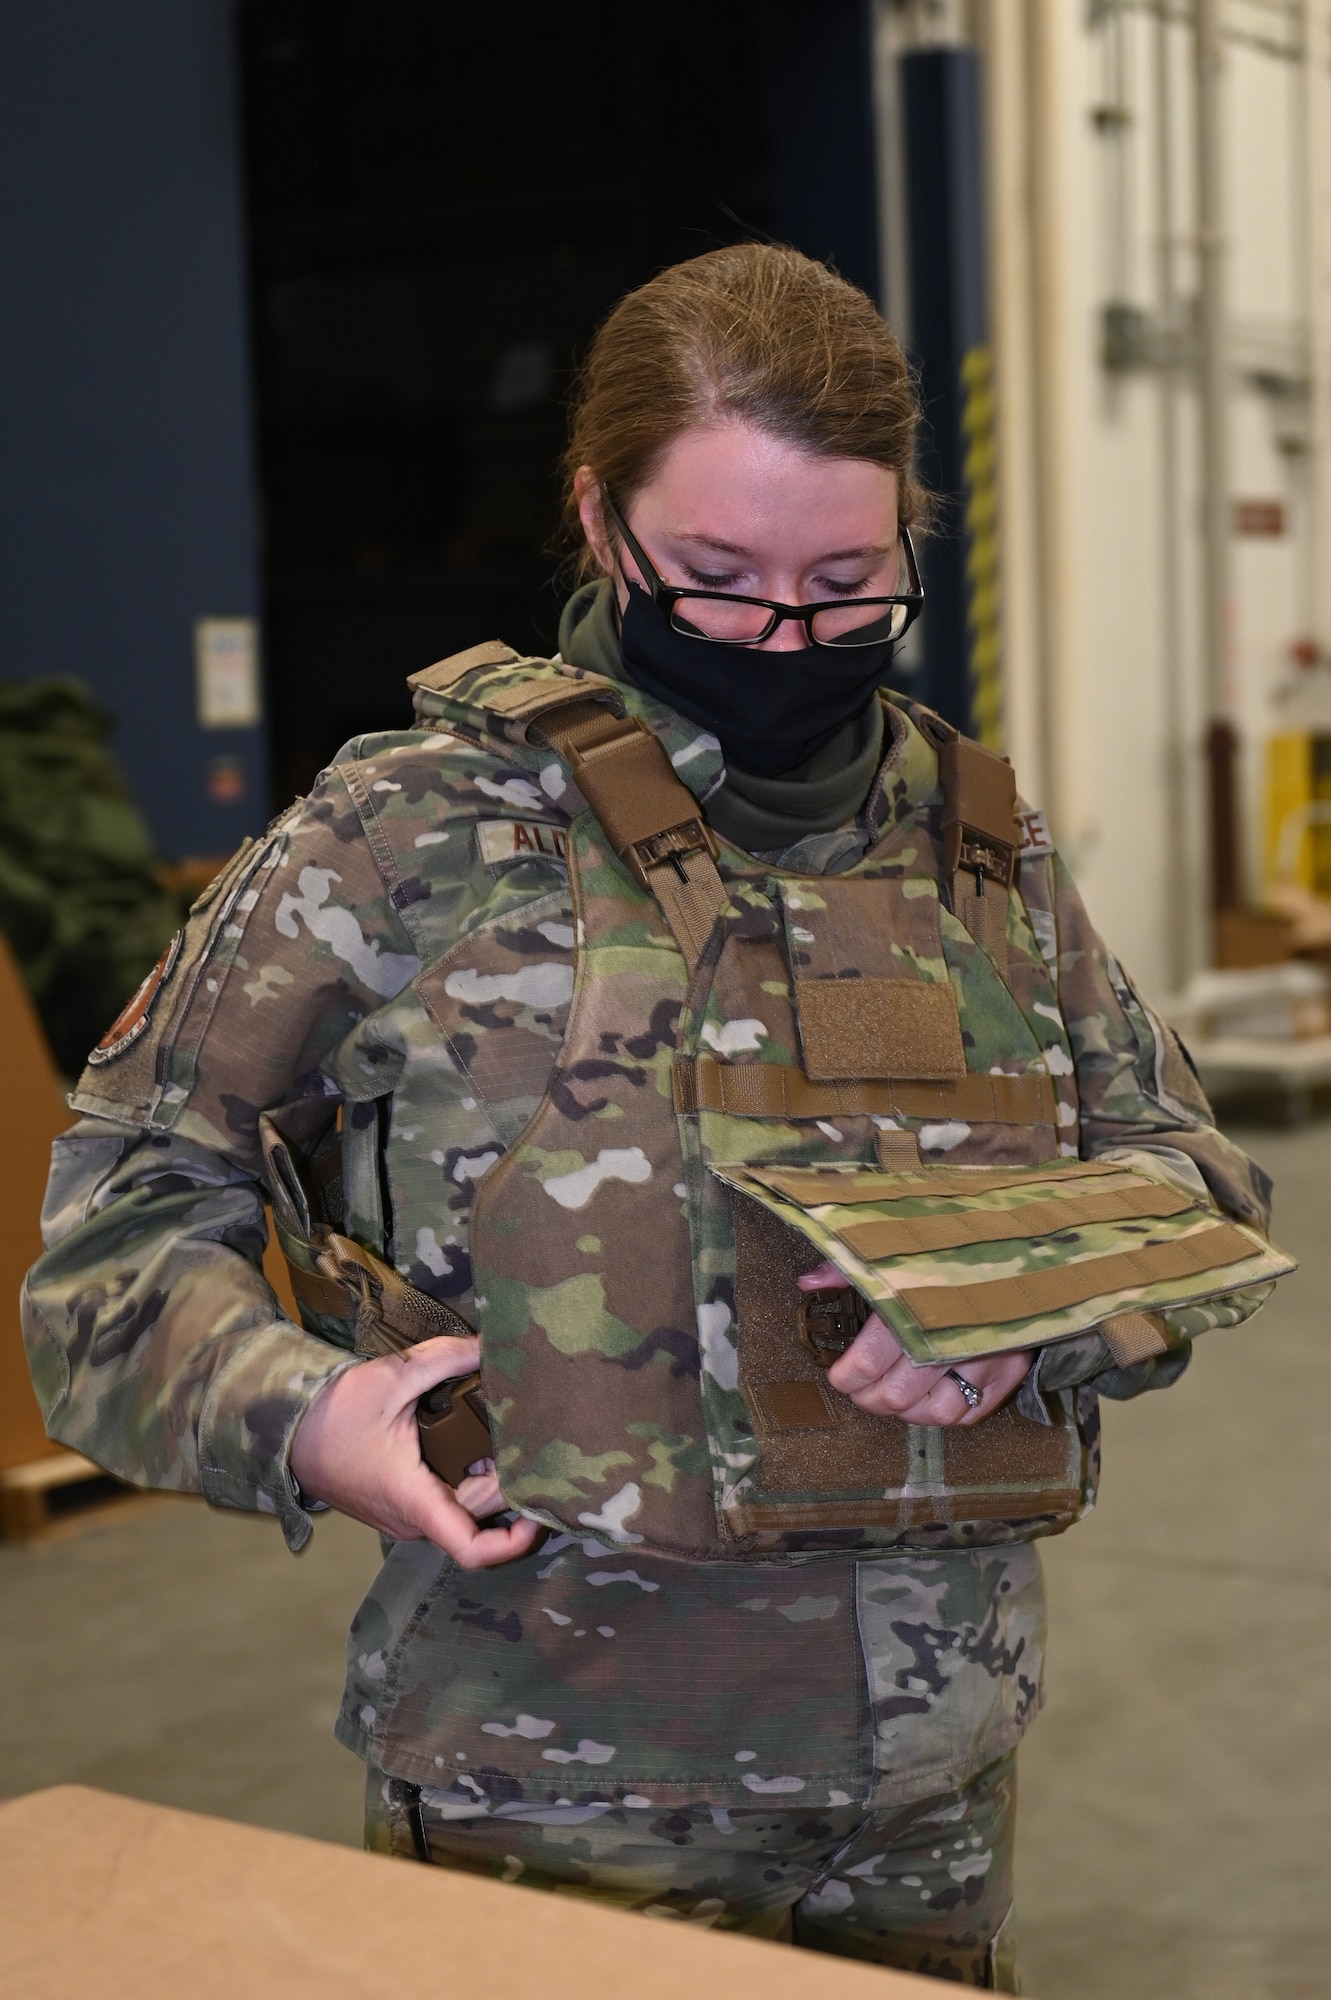 New Soldier armor weighs less, offers more options